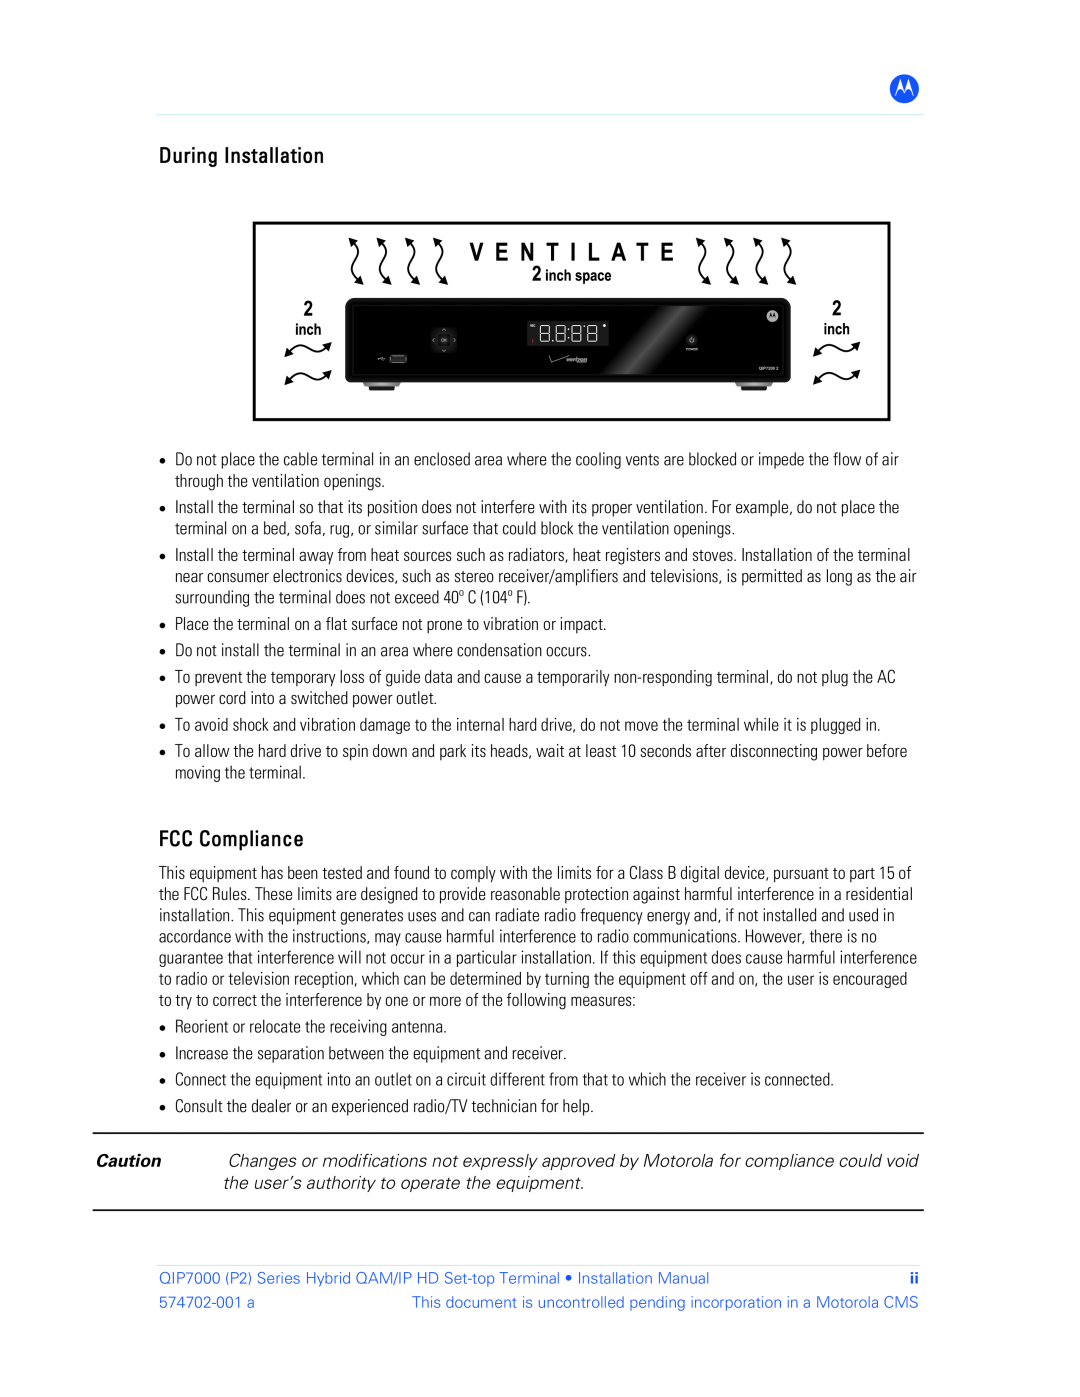 Motorola QIP7000 installation manual During Installation, FCC Compliance, the user’s authority to operate the equipment 